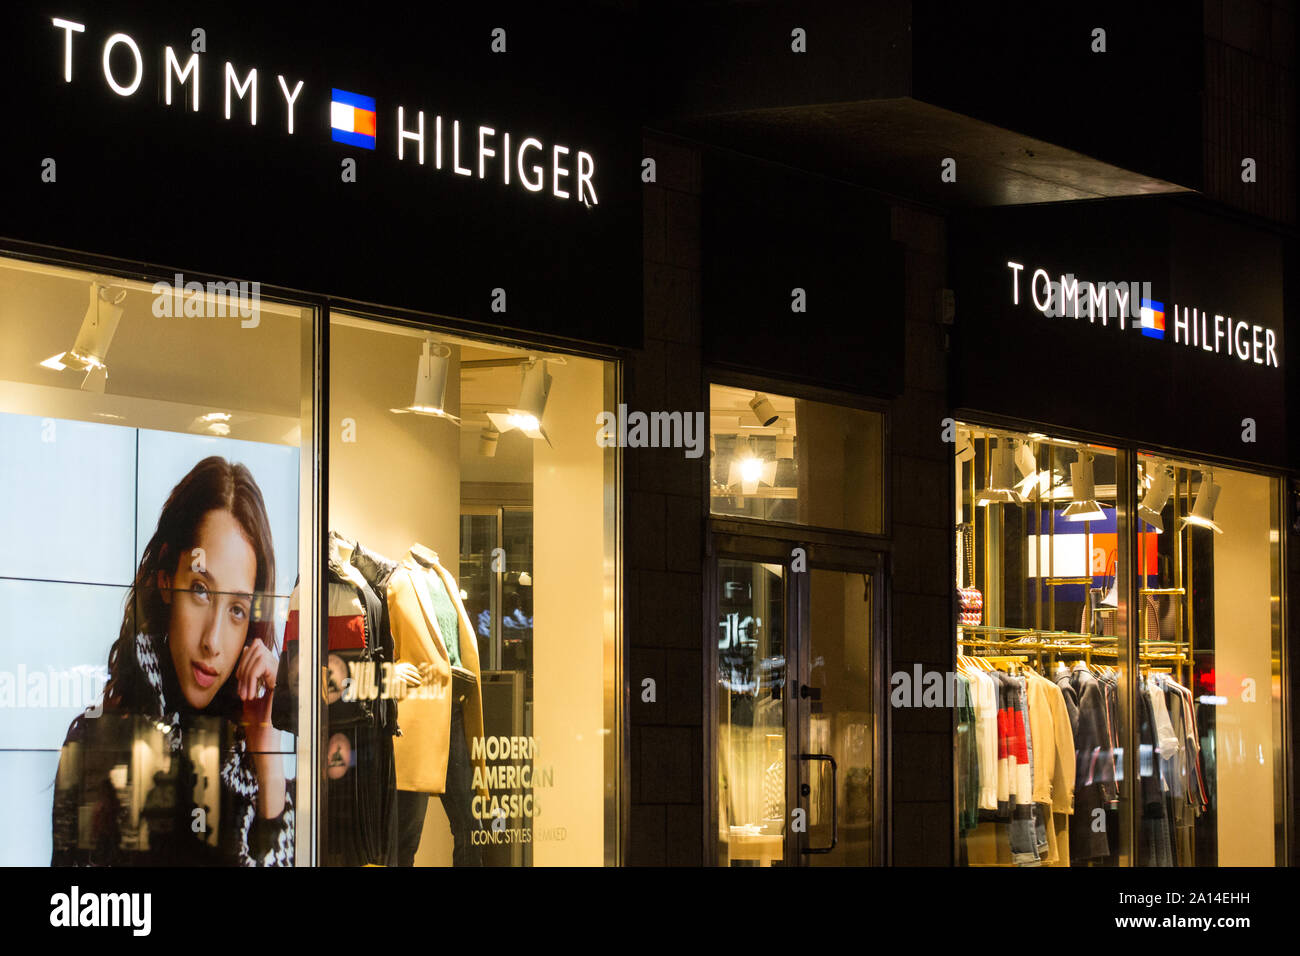 Tommy Hilfiger an American premium clothing company logo seen in Gothenburg  Stock Photo - Alamy